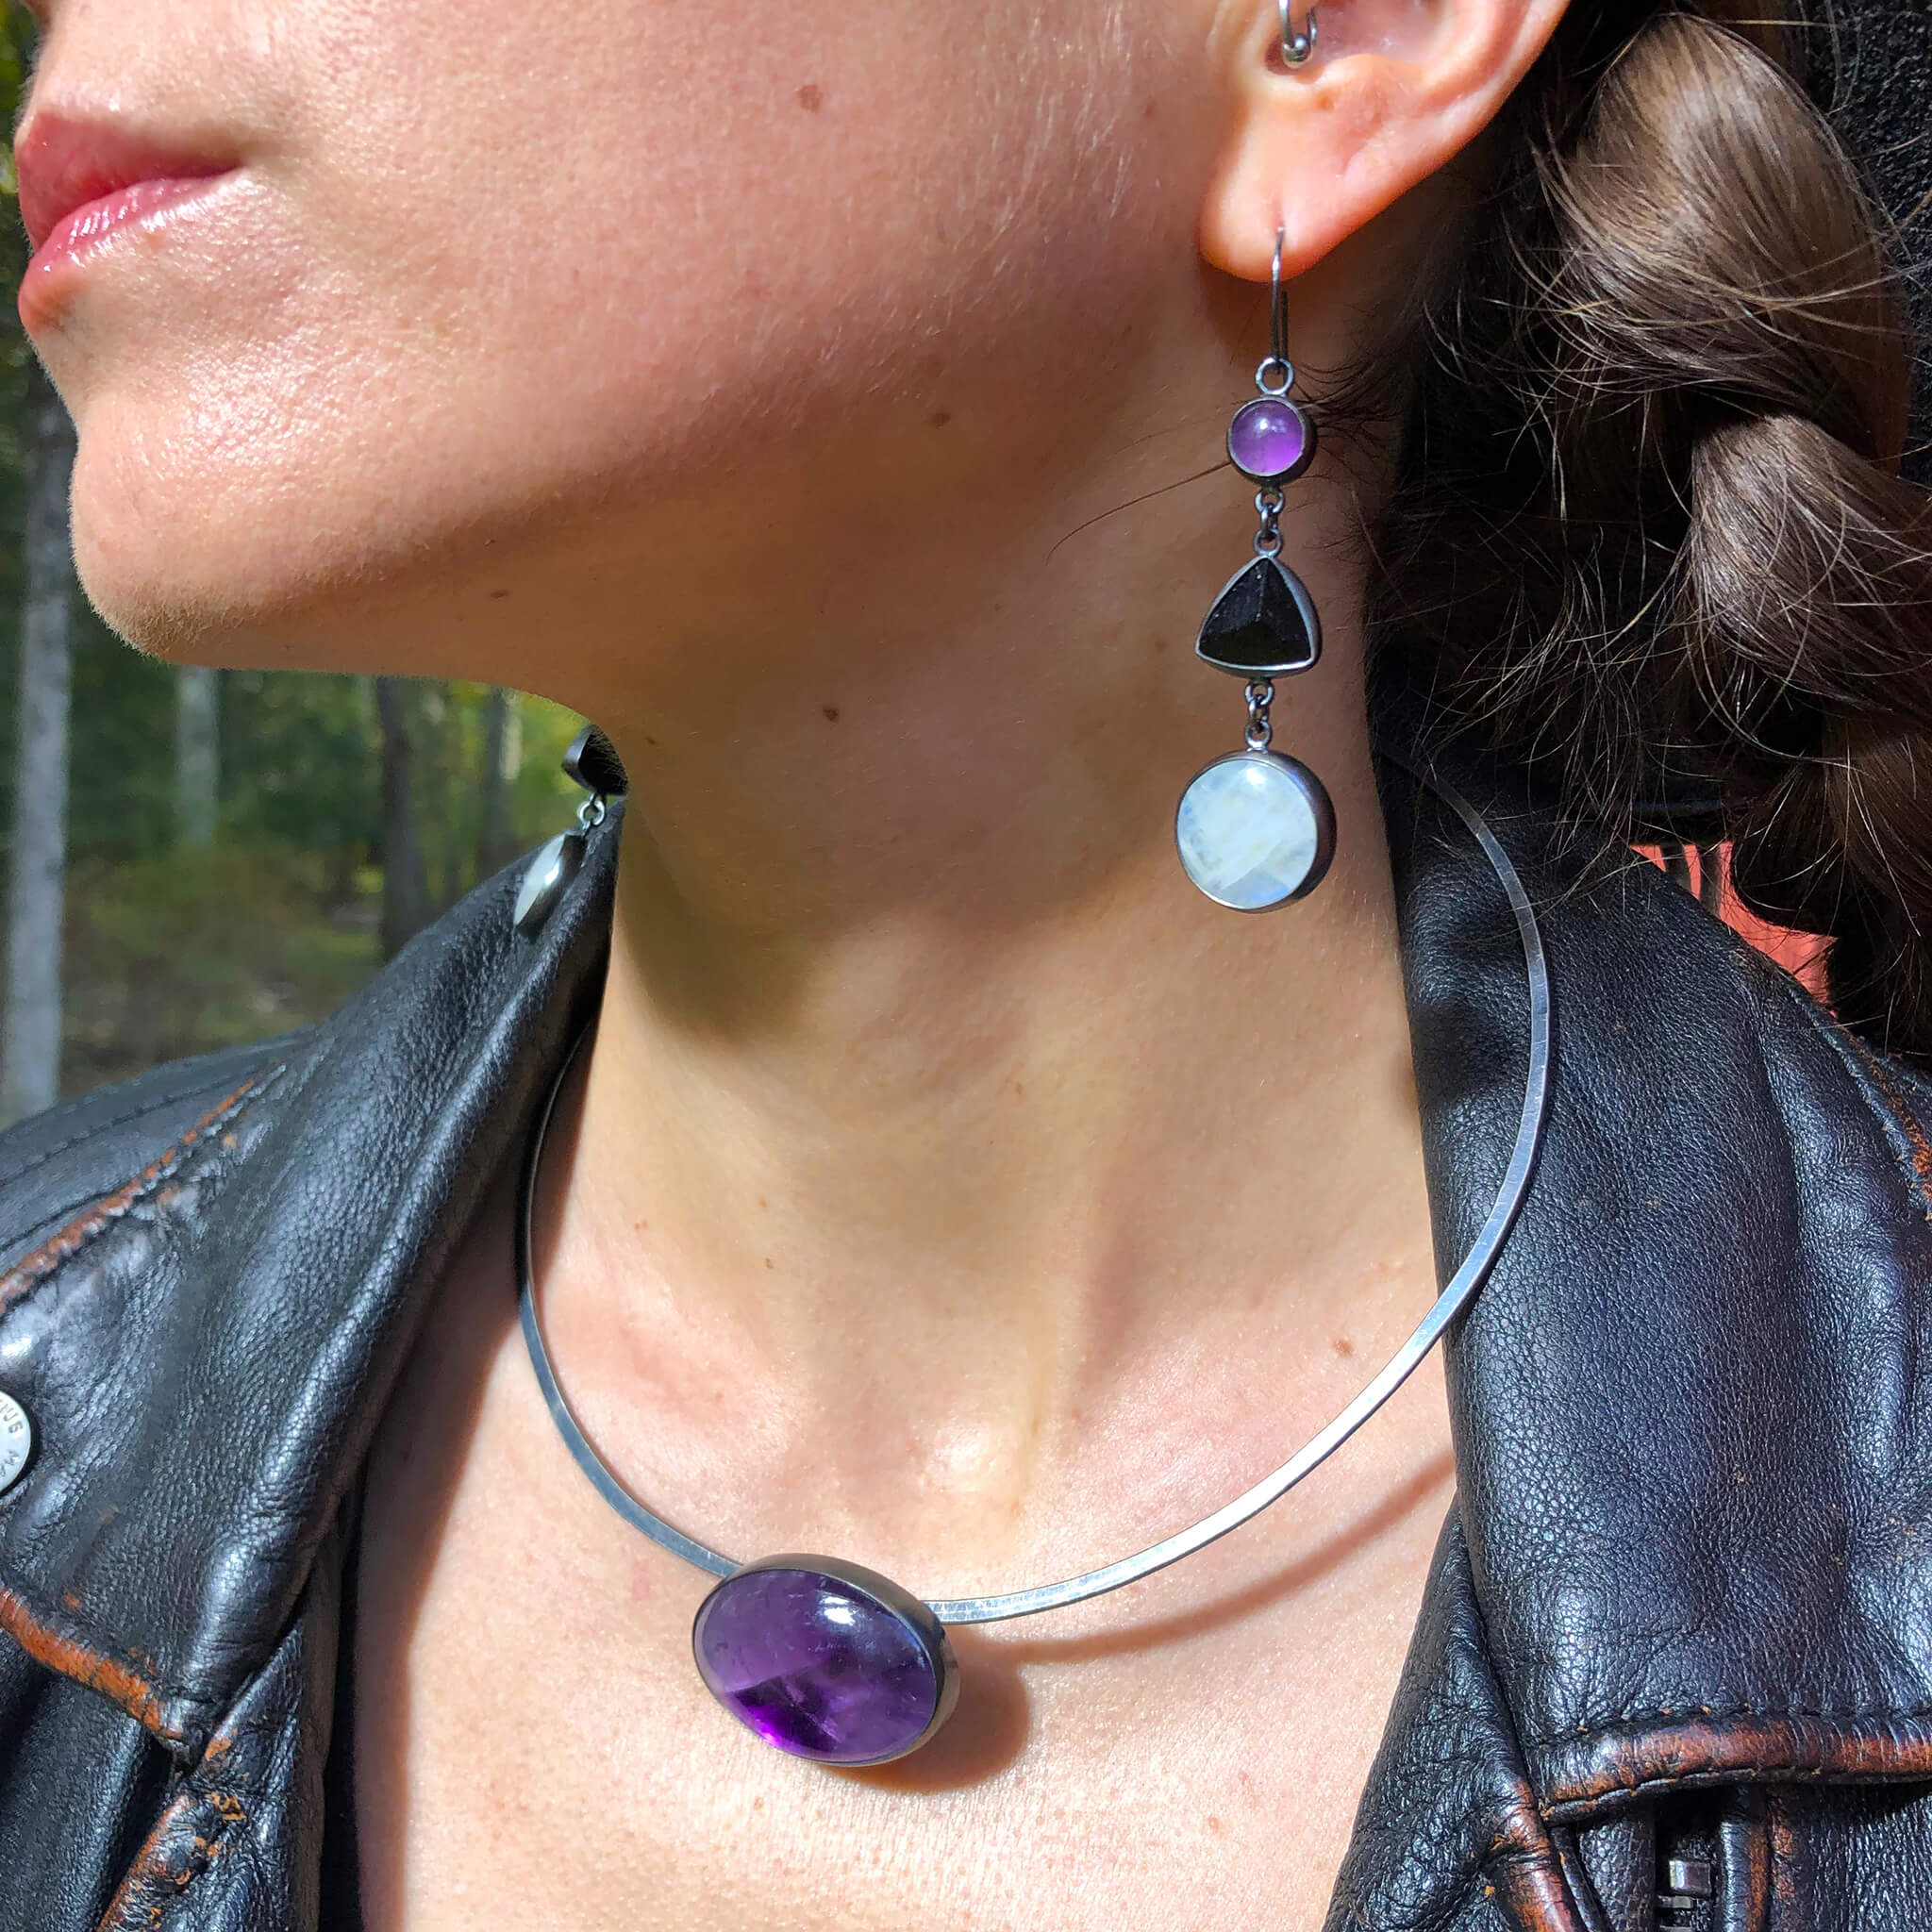 Amethyst, Black Tourmaline, Moonstone Earrings. Season of the Witch collection by Alex Lozier Jewelry.